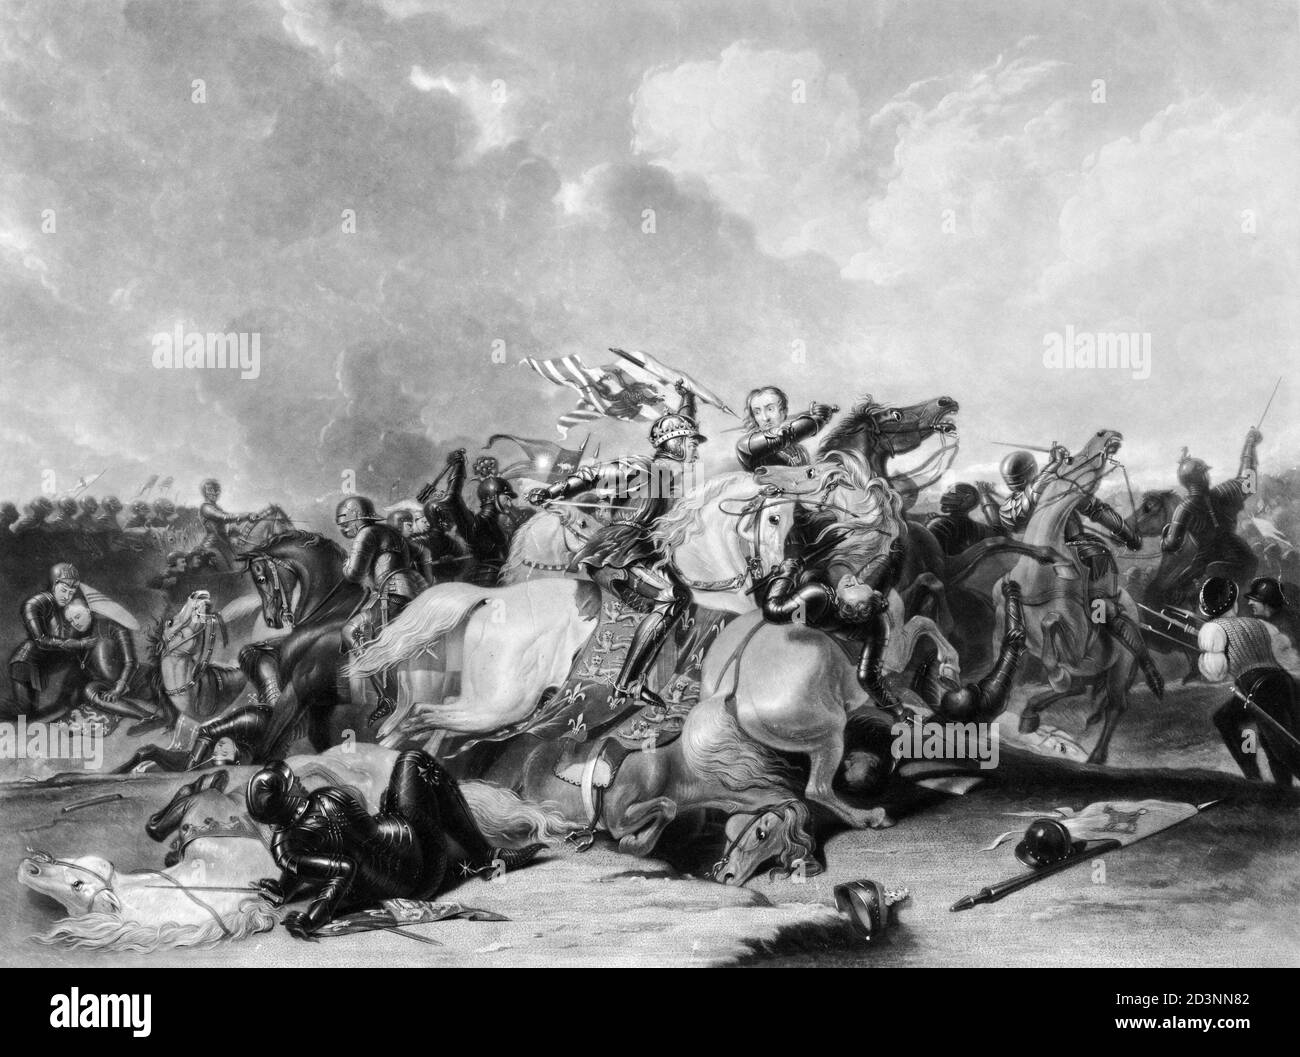 The Battle of Bosworth Field, the last significant battle in the Wars of the Roses, 1485. Richard III is on horseback  wielding a sword. Print from 1835. Stock Photo